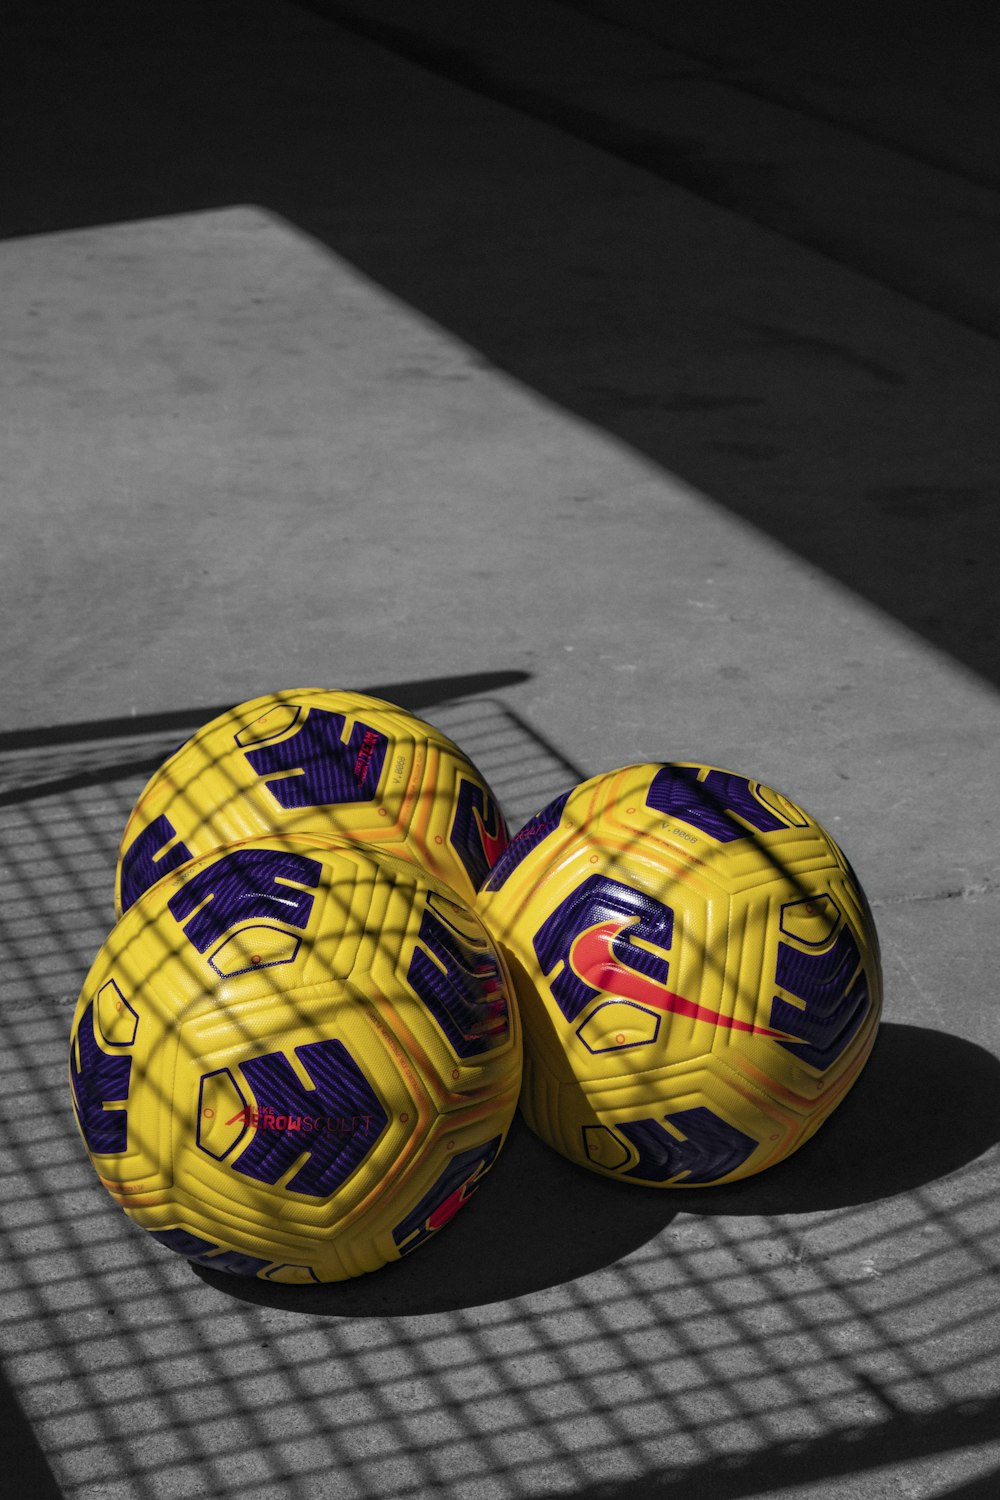 yellow and black soccer ball on gray wooden floor